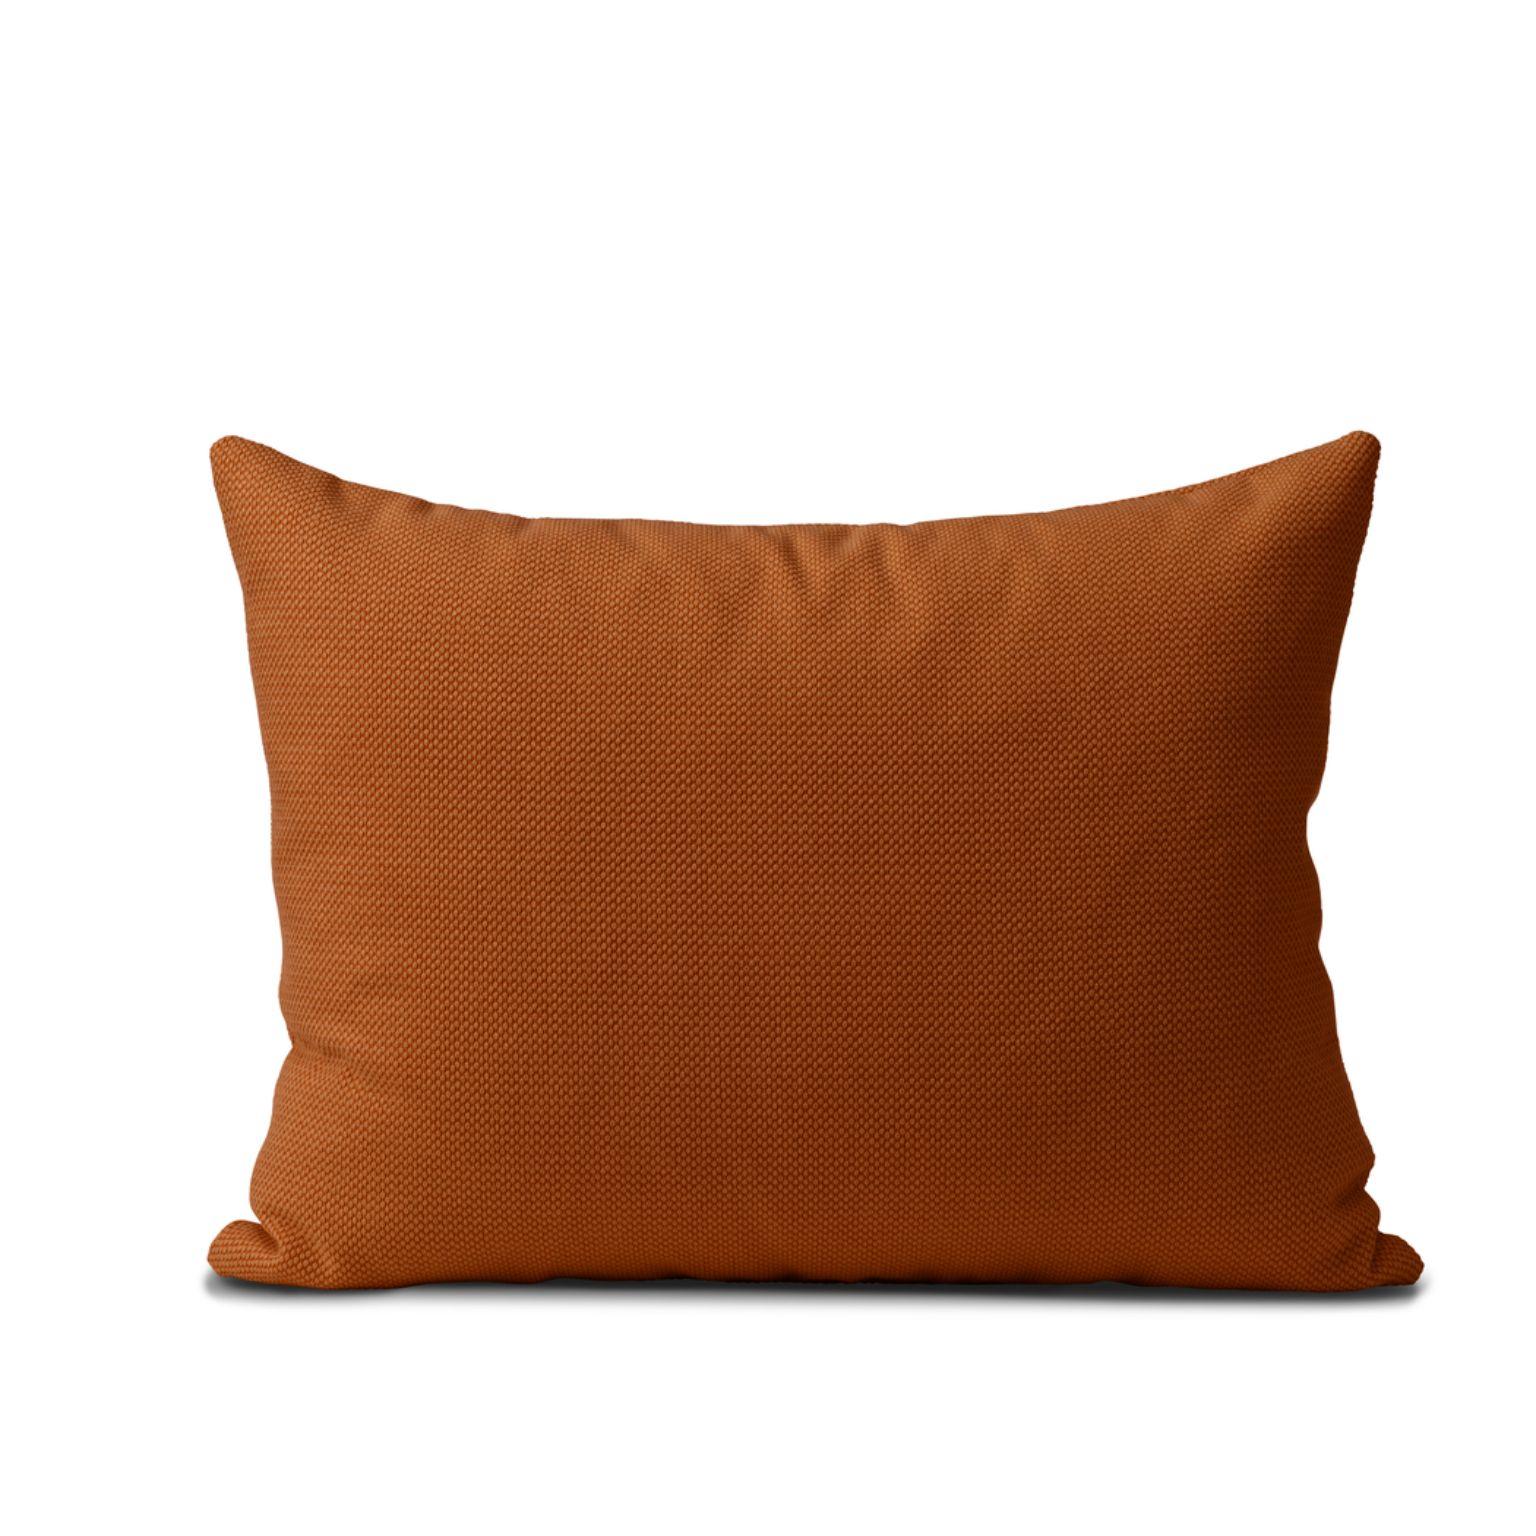 Galore cushion square terracotta by Warm Nordic
Dimensions: D70 x H 50 cm
Material: Textile upholstery, Granulate and feathers filling.
Weight: 1.4 kg
Also available in different colours and finishes. 

An elegant oversized sofa cushion, which